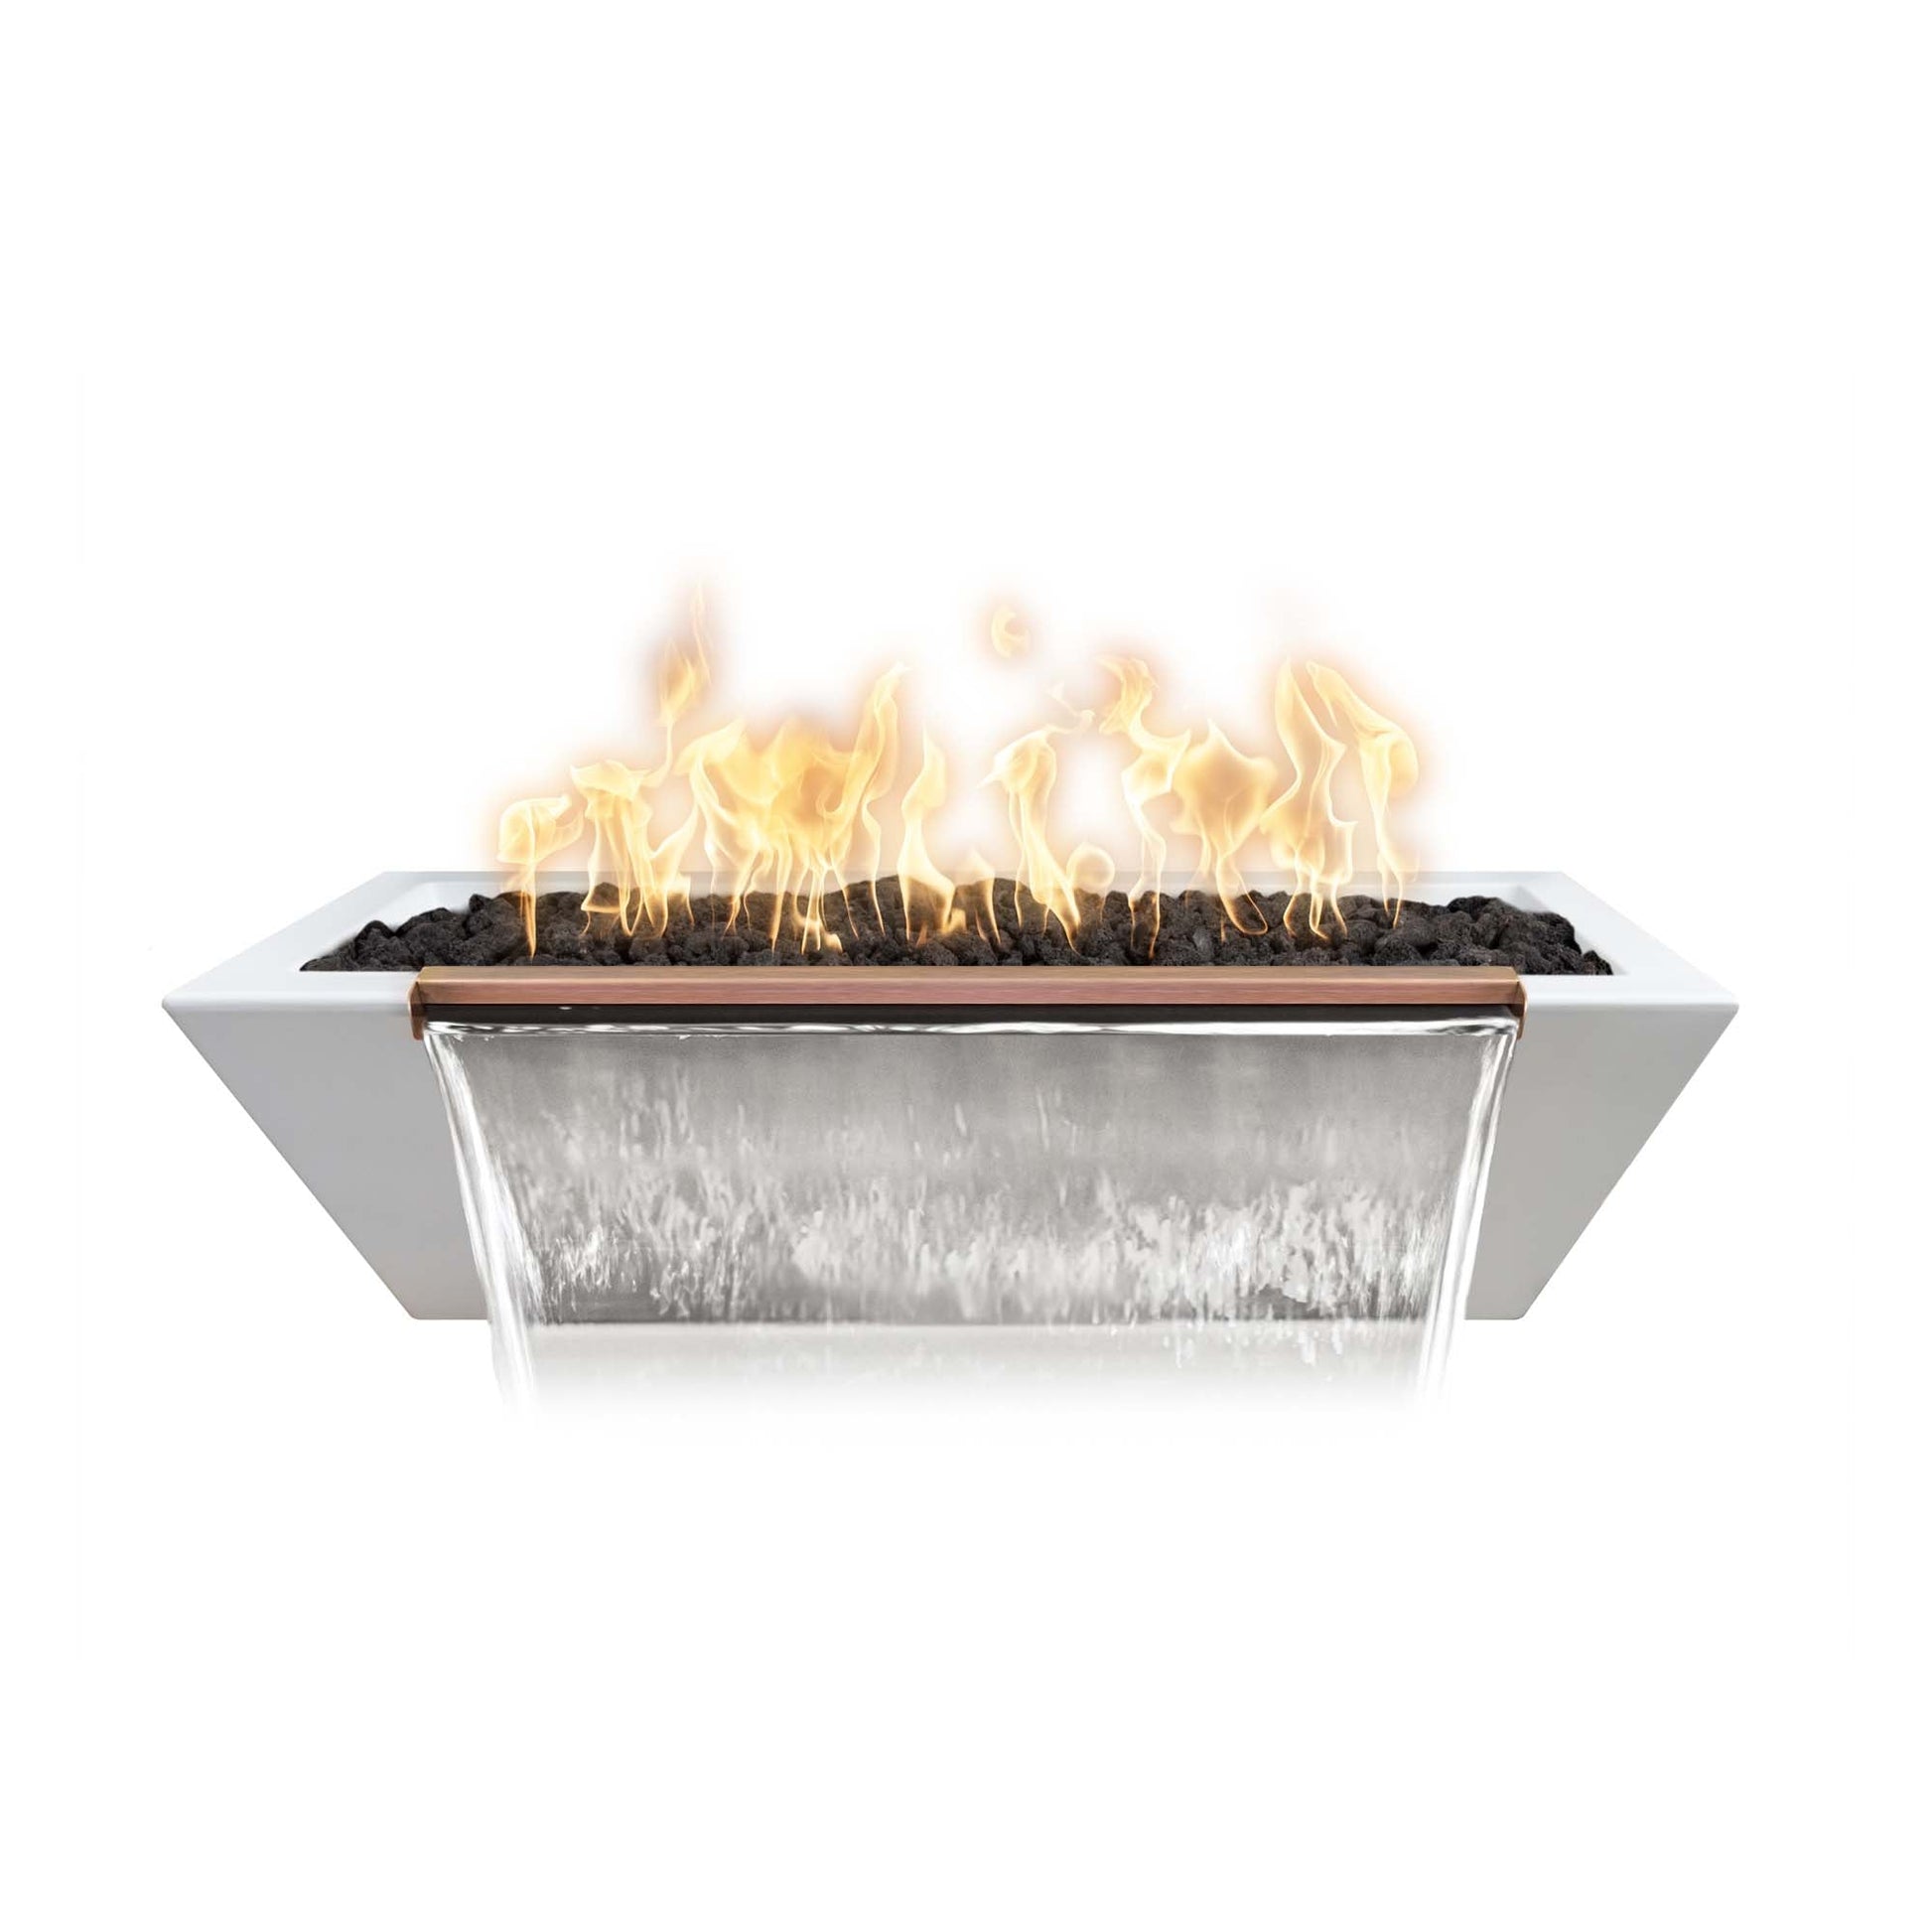 The Outdoor Plus Linear Maya 60" Vanilla GFRC Concrete Natural Gas Fire & Water Bowl with Match Lit Ignition